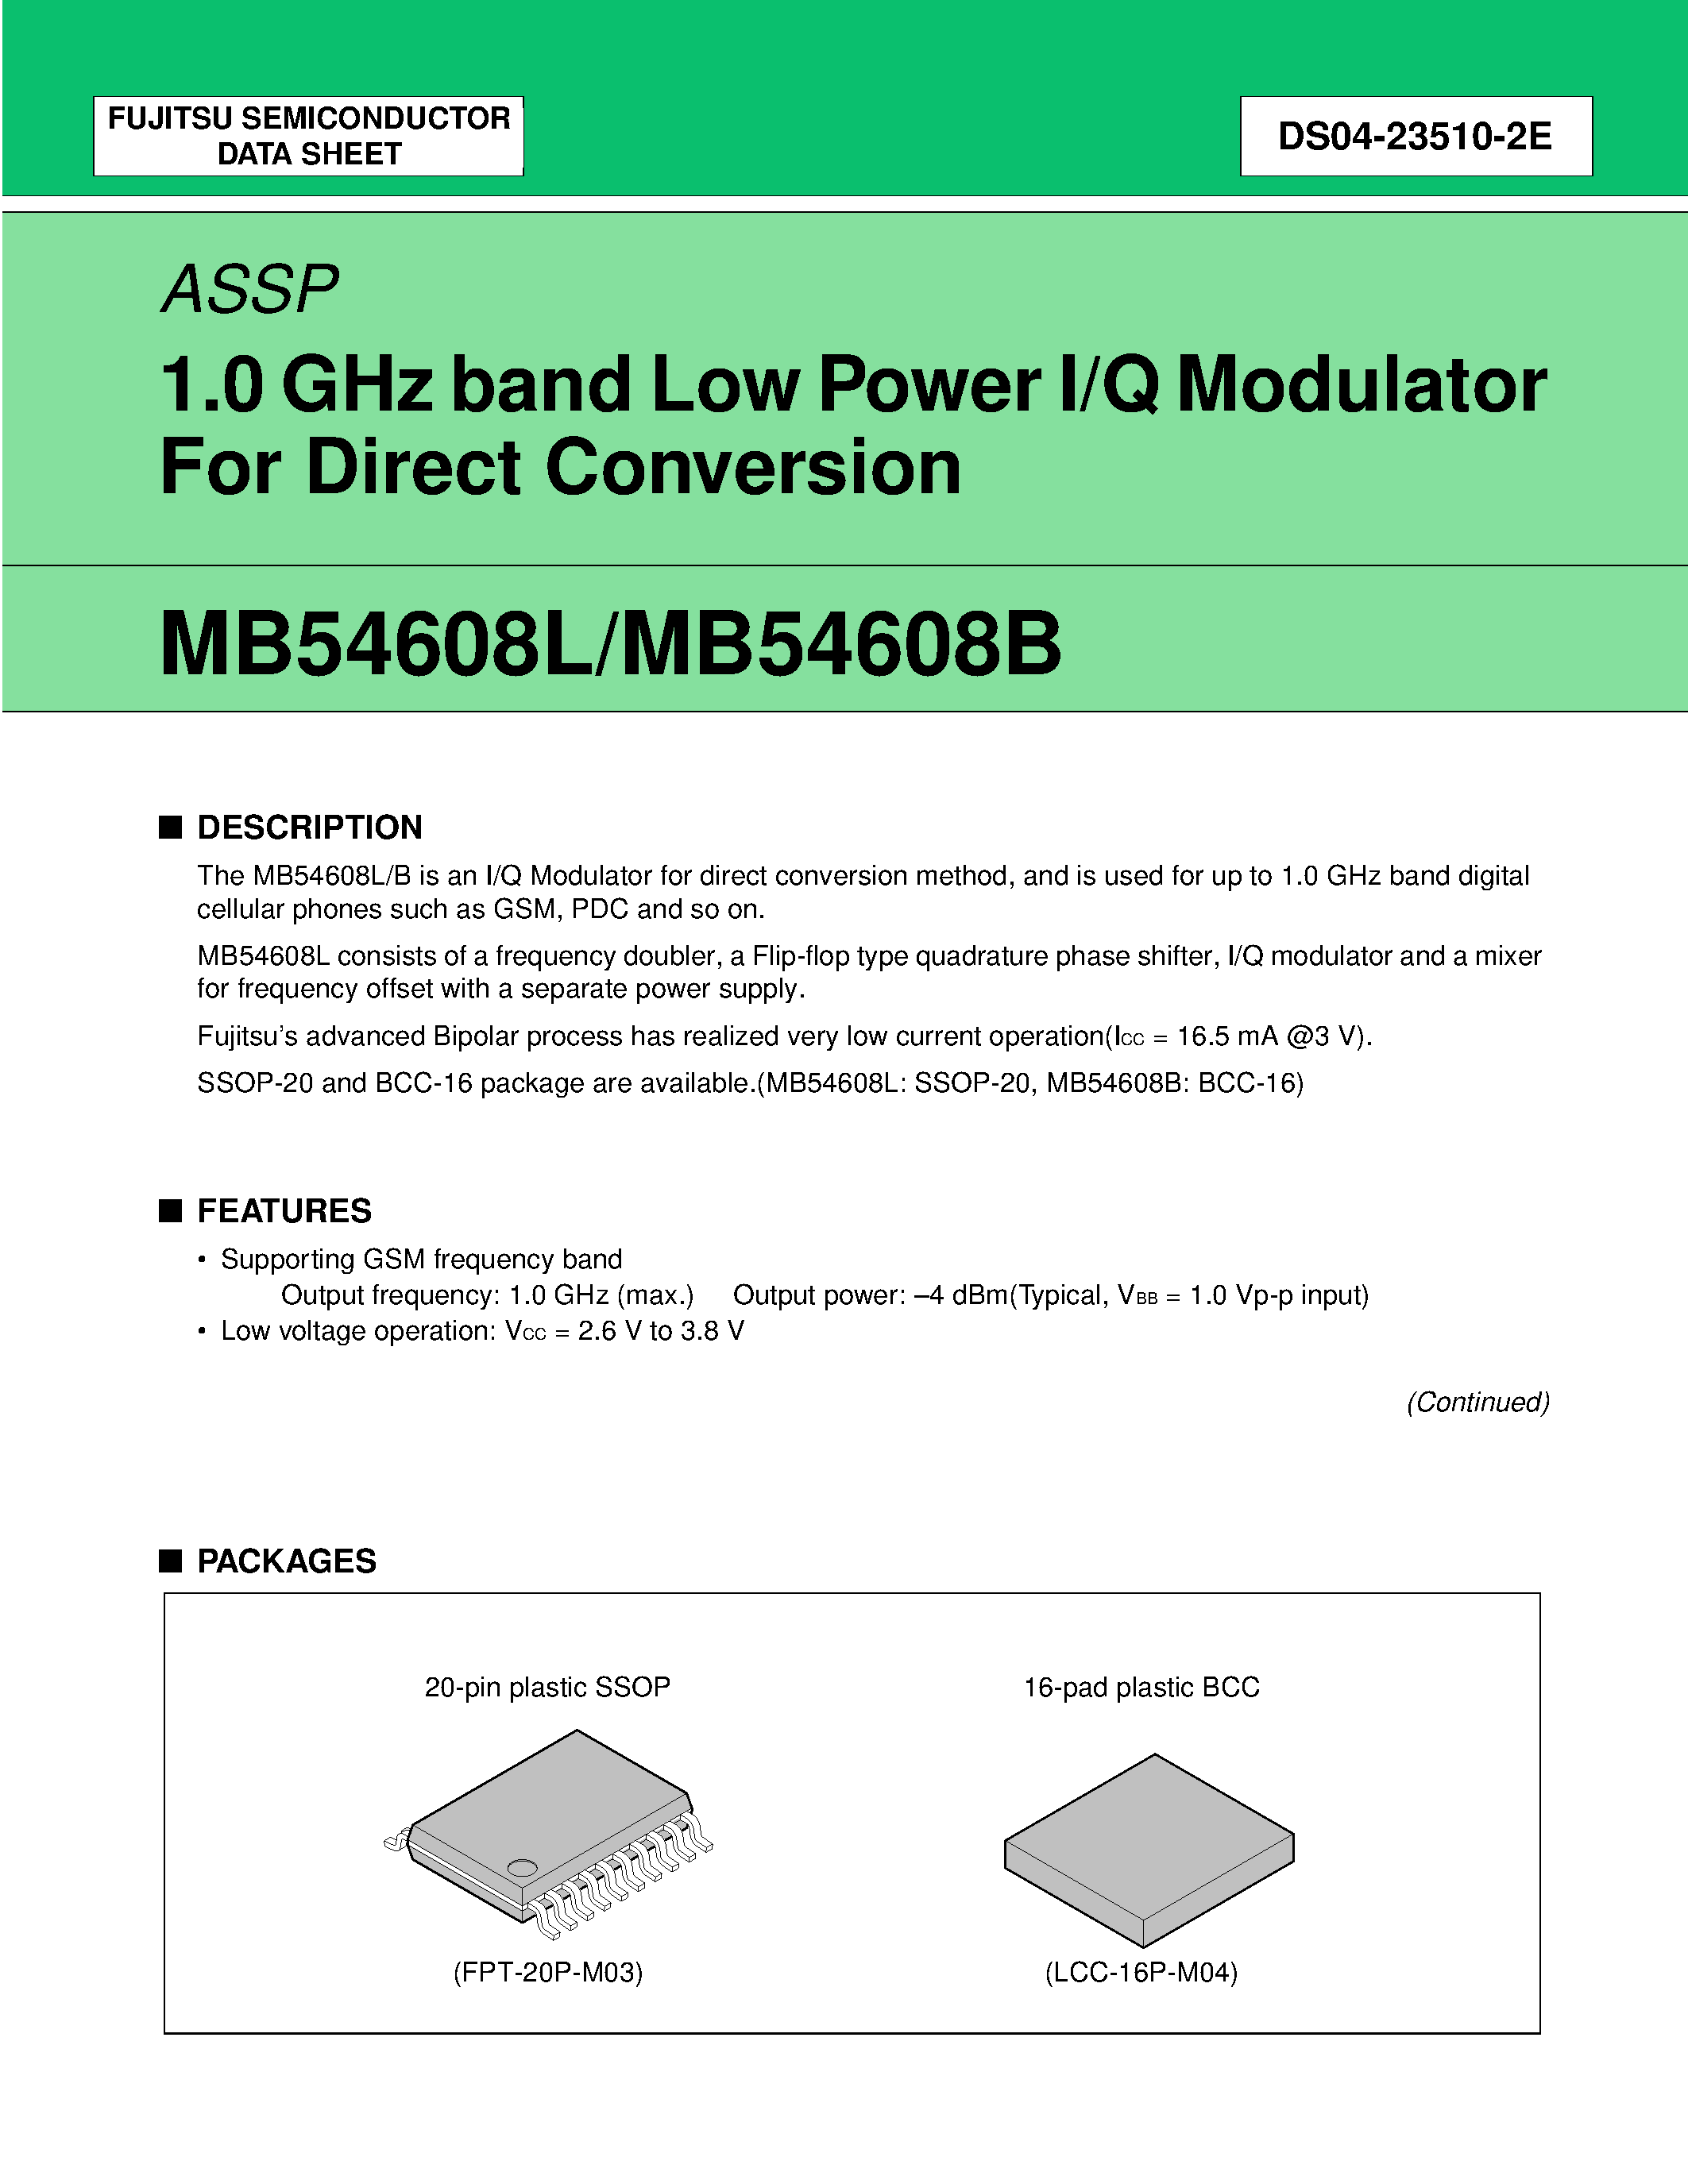 Datasheet MB54608B - 1.0 GHz band Low Power I/Q Modulator For Direct Conversion page 1